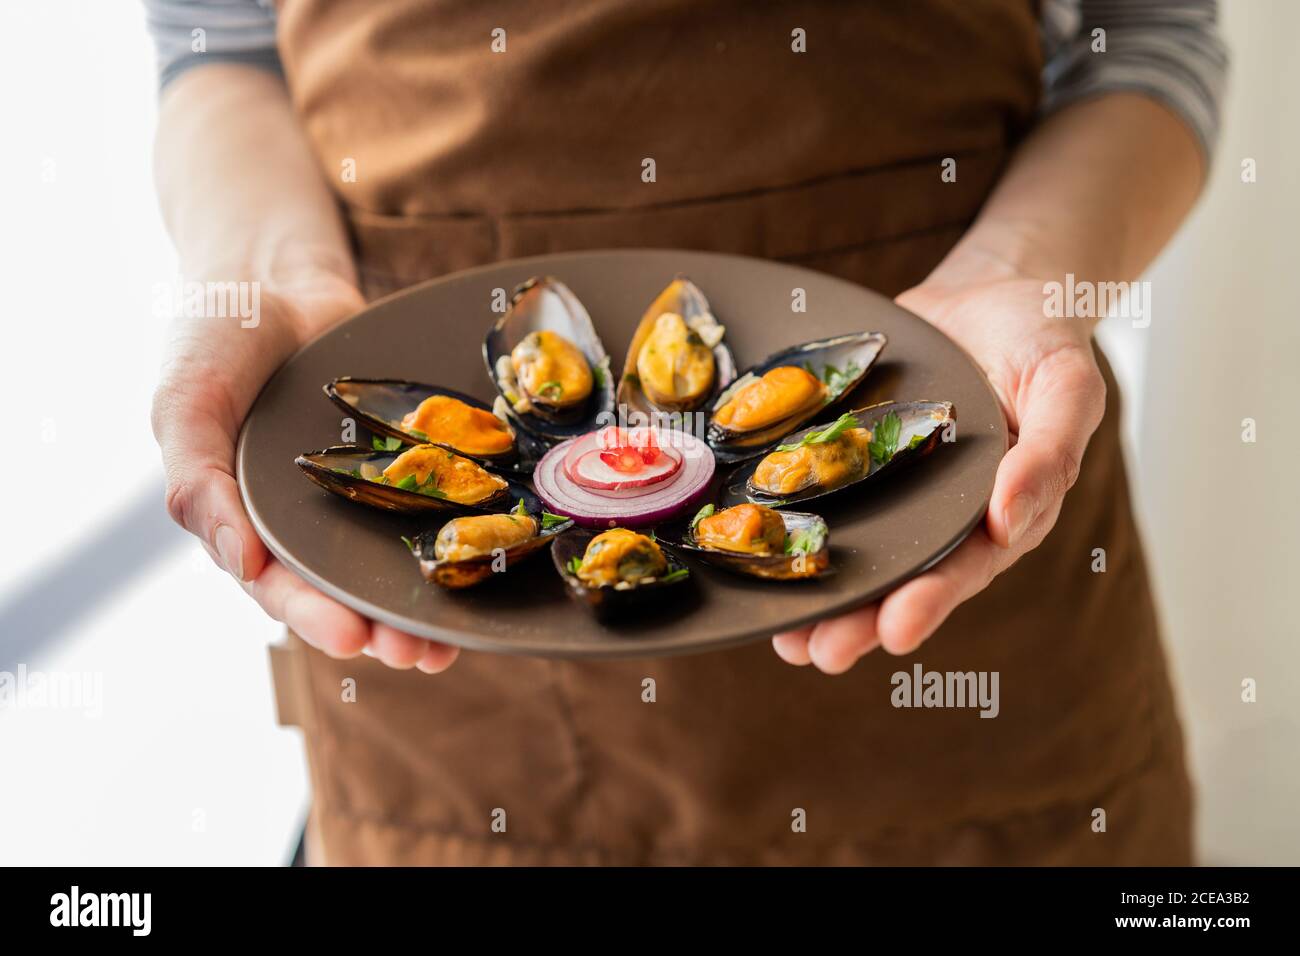 unrecognizable female holding ceramic plate with portion of palatable boiled ussels Stock Photo